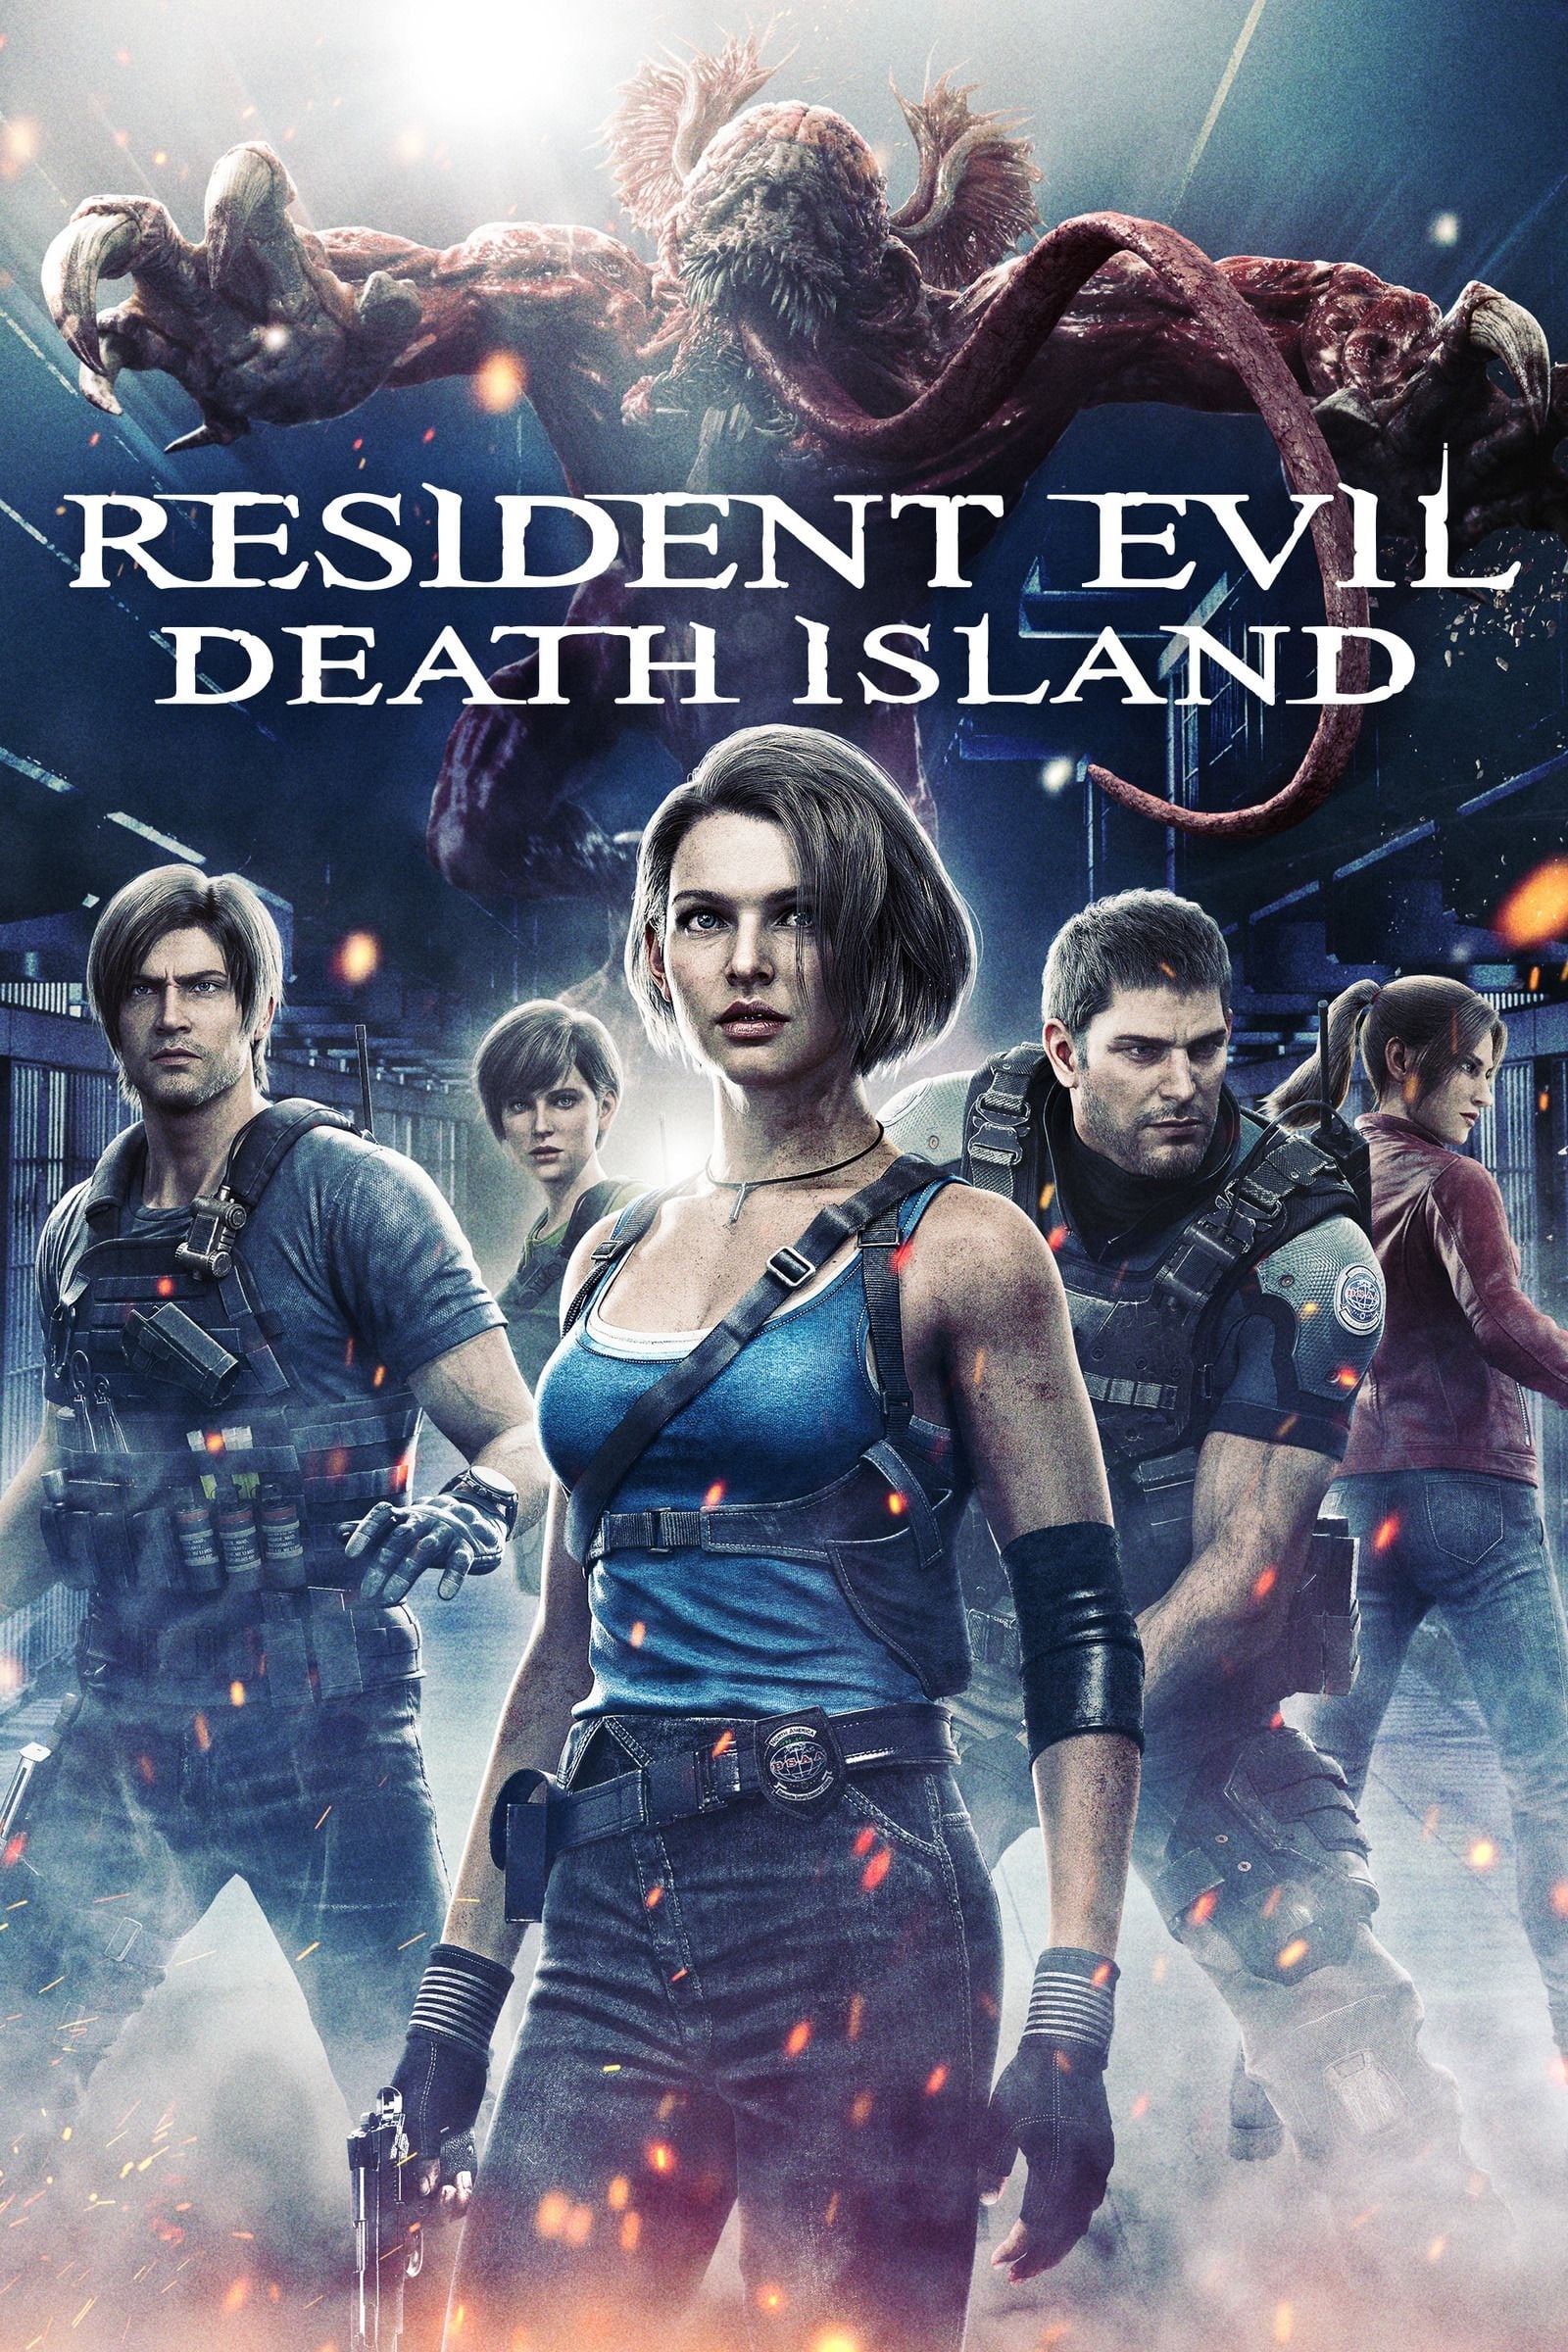 Resident Evil Death Island 2023 BluRay Dual Audio Hindi And English Hollywood Hindi Dubbed Full Movie Download In Hd (filmy4me.filmy4ward.fun)